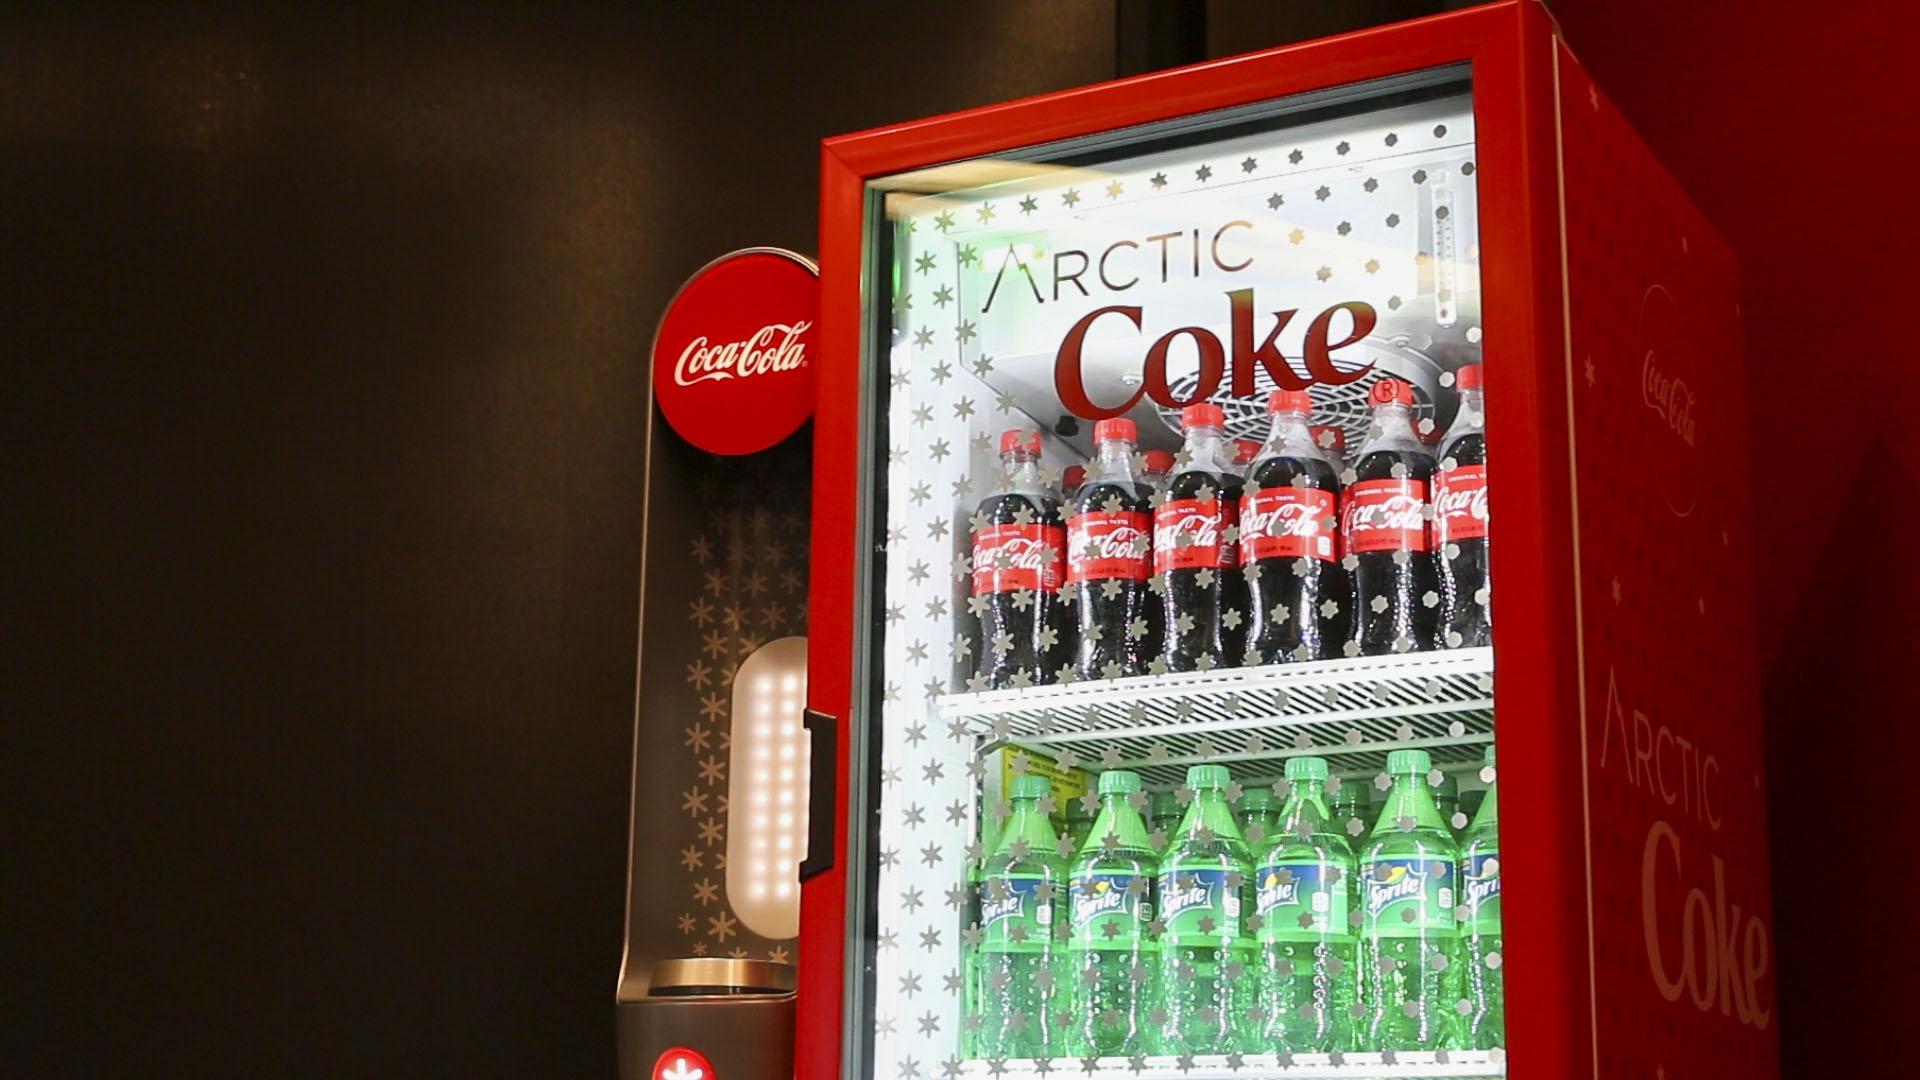 Arctic Coke: Cutting Edge Coolers Make Icy Magic In Convenience